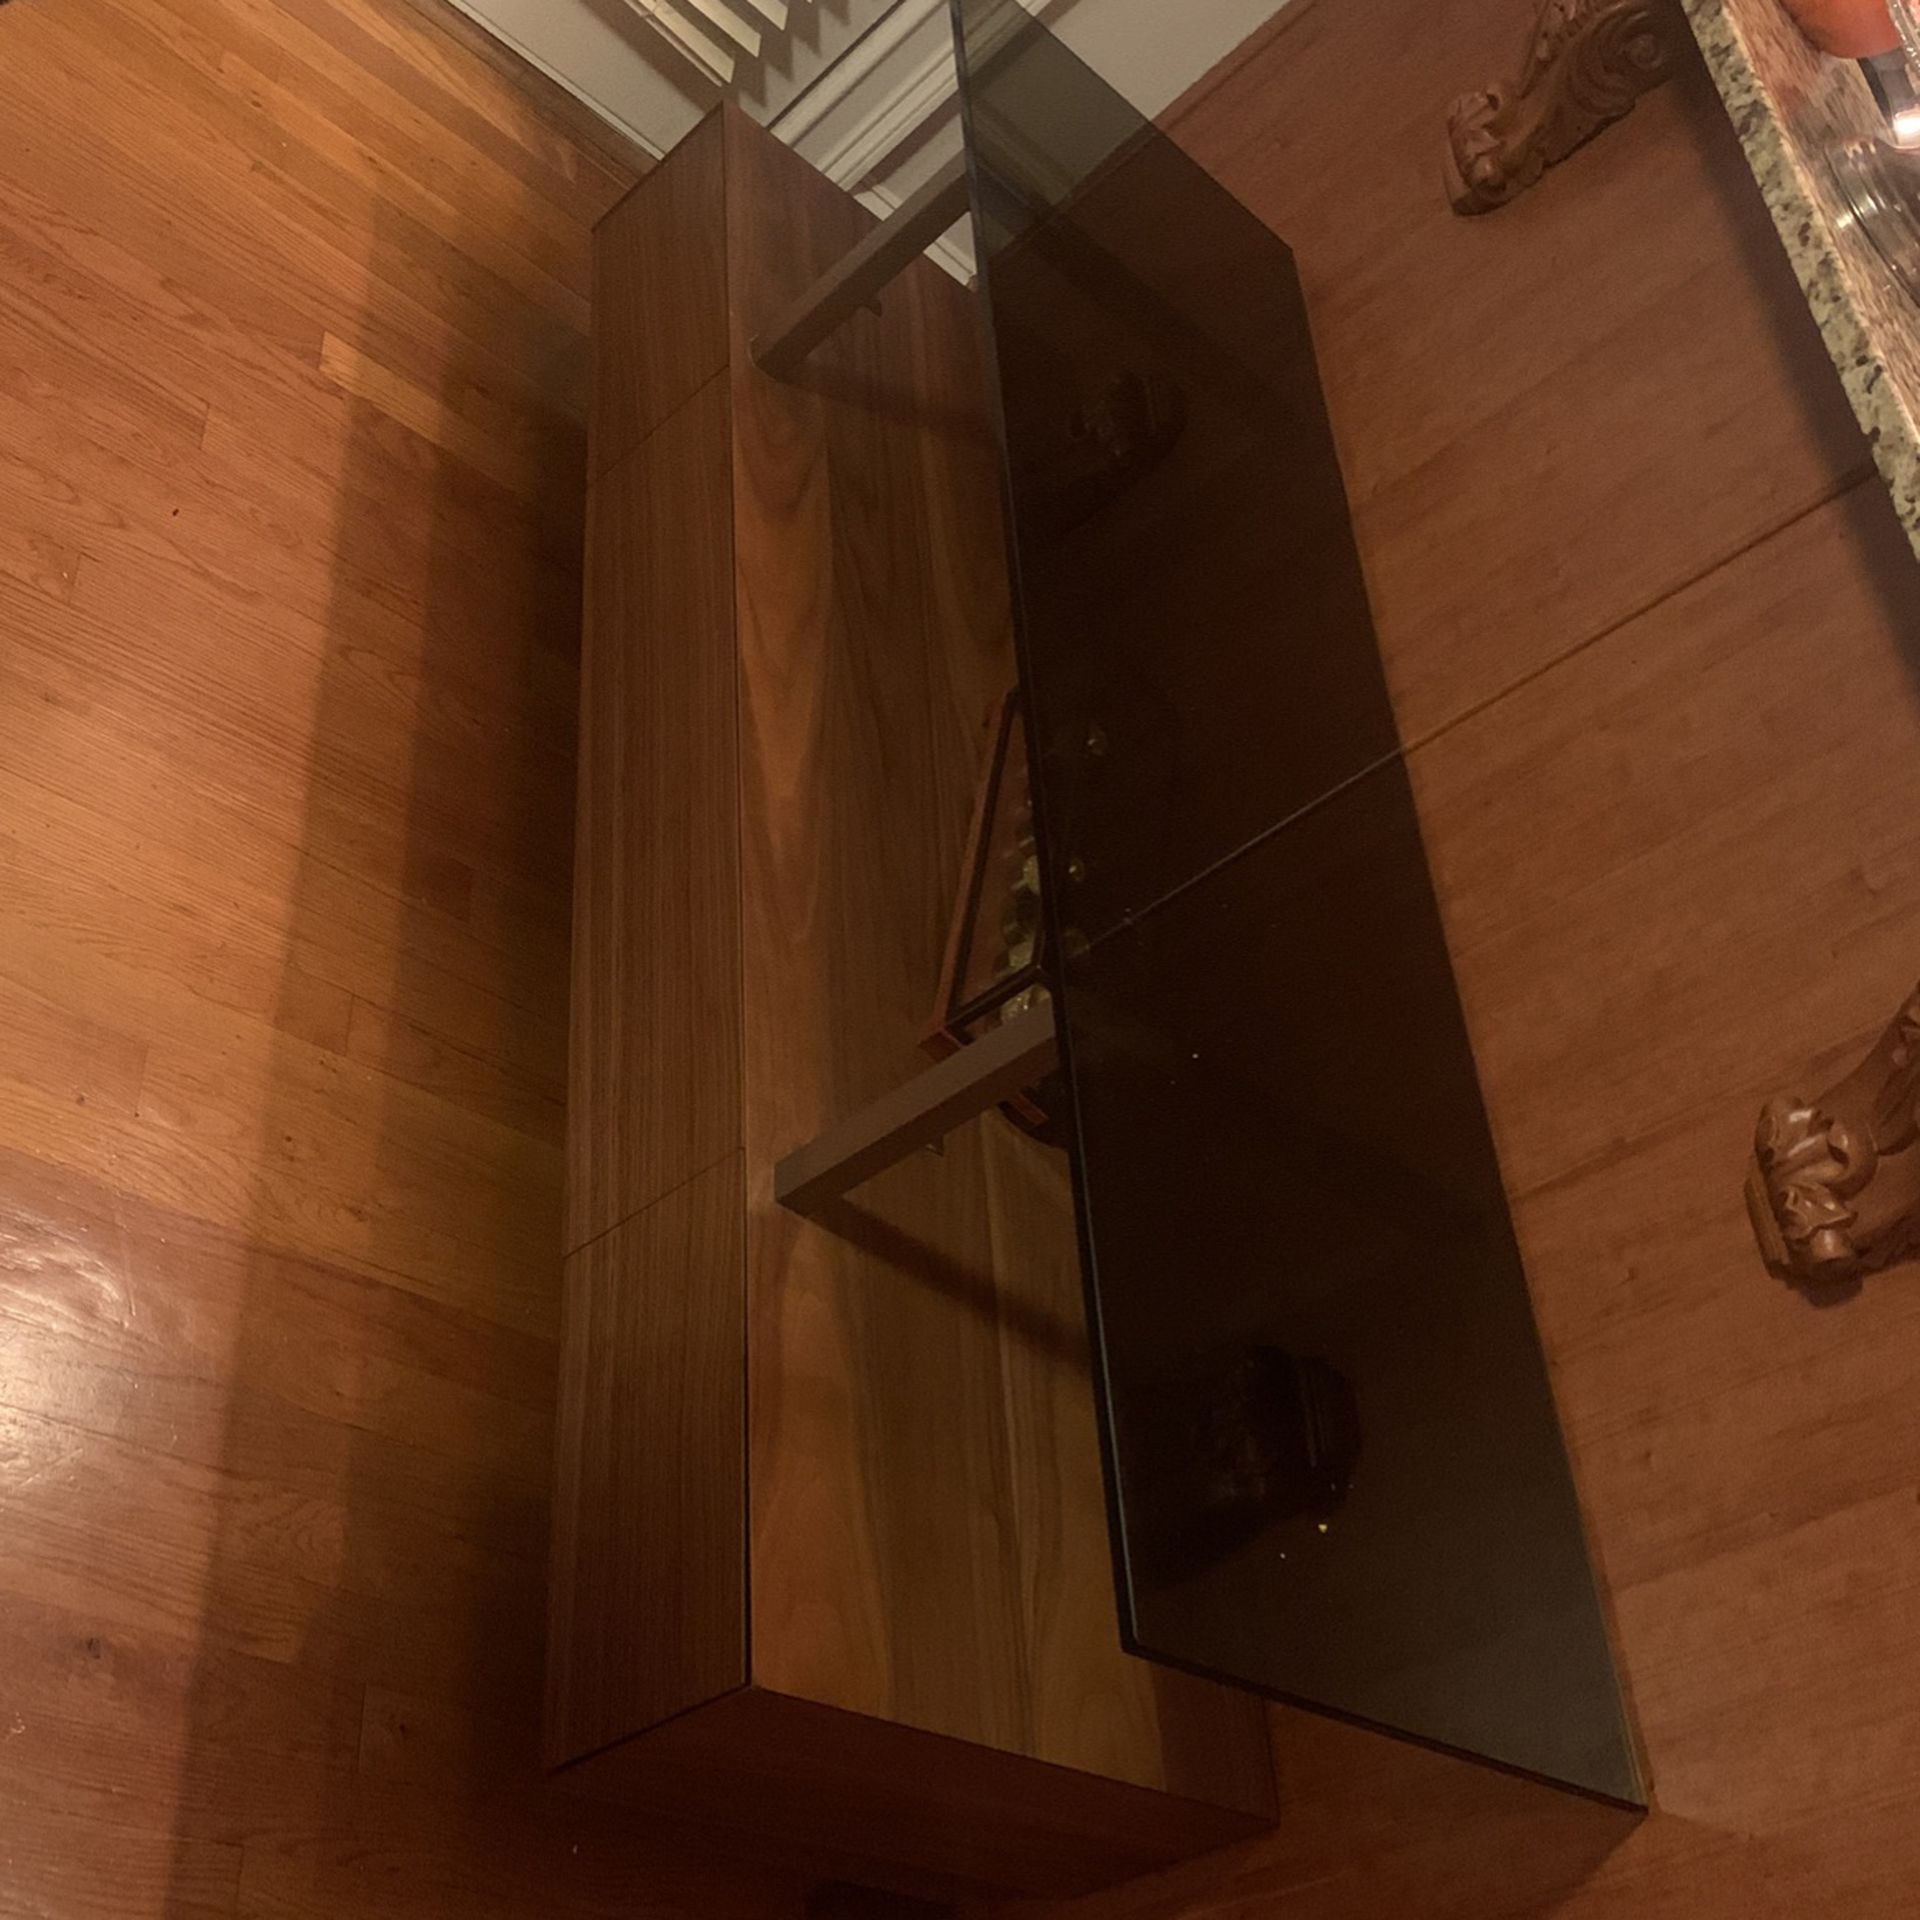 TV stand - it rolls as well.